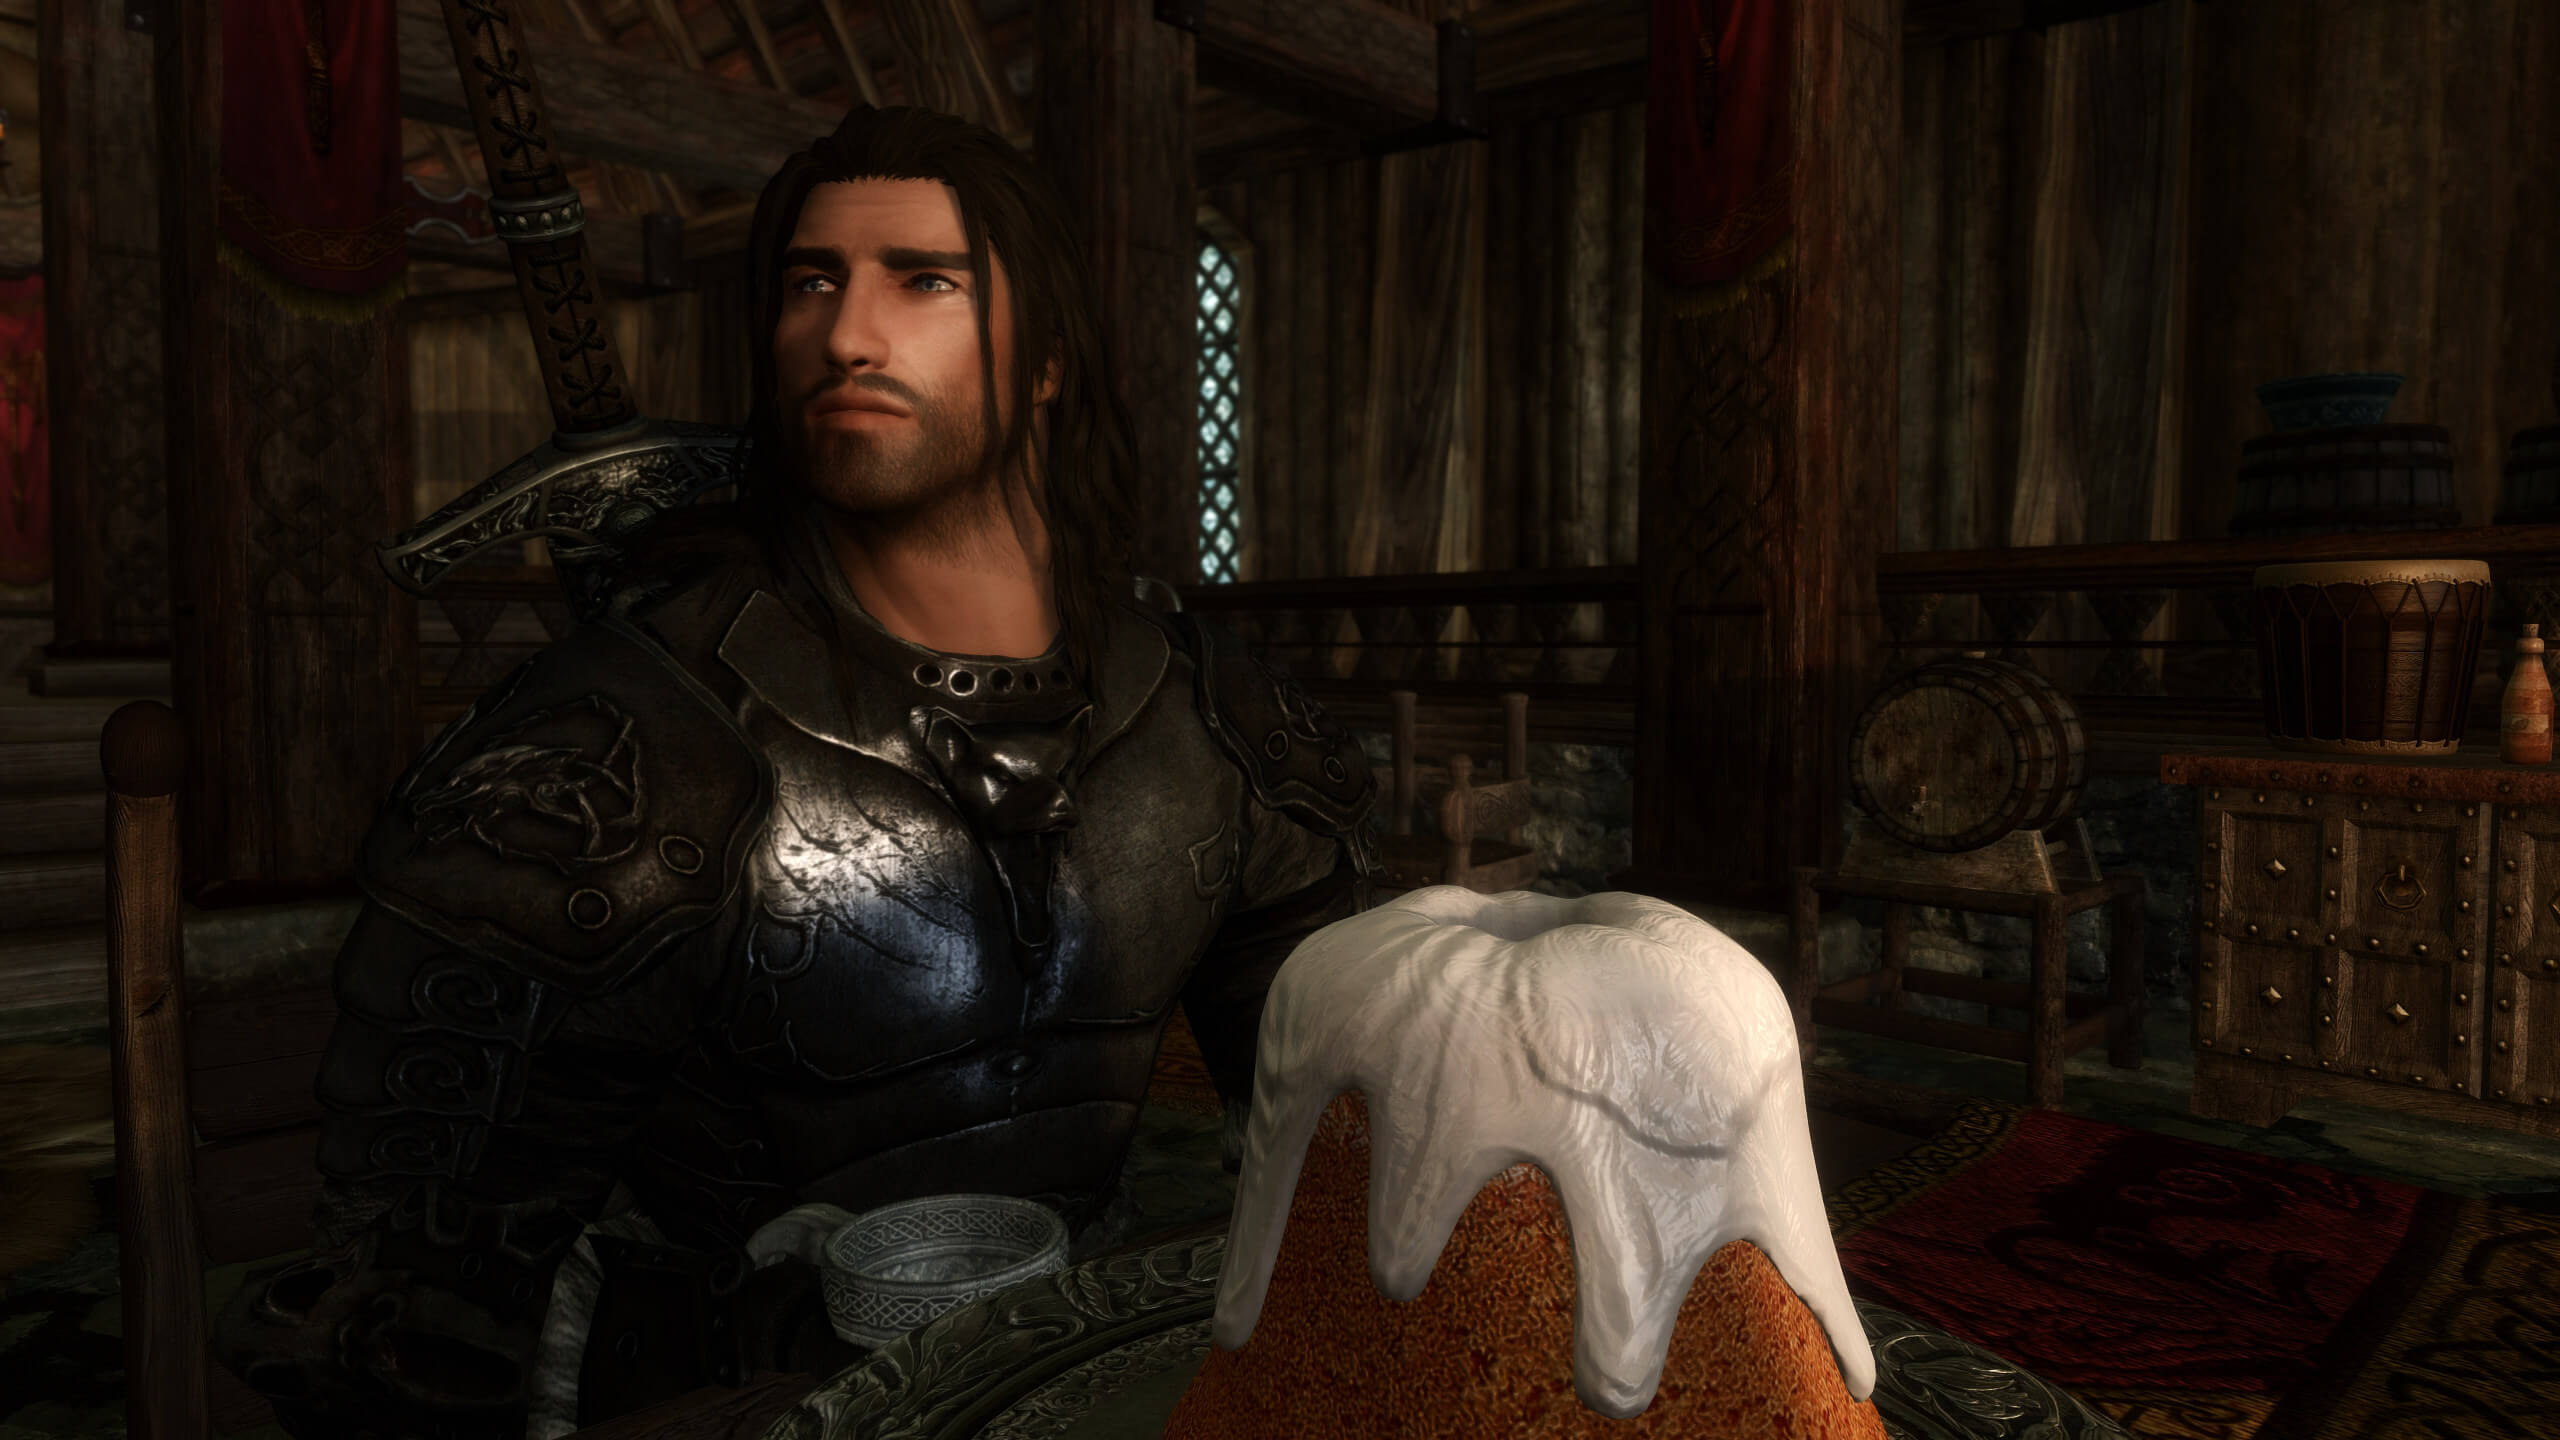 CBR on X: A new Skyrim mod adds one of the most popular game